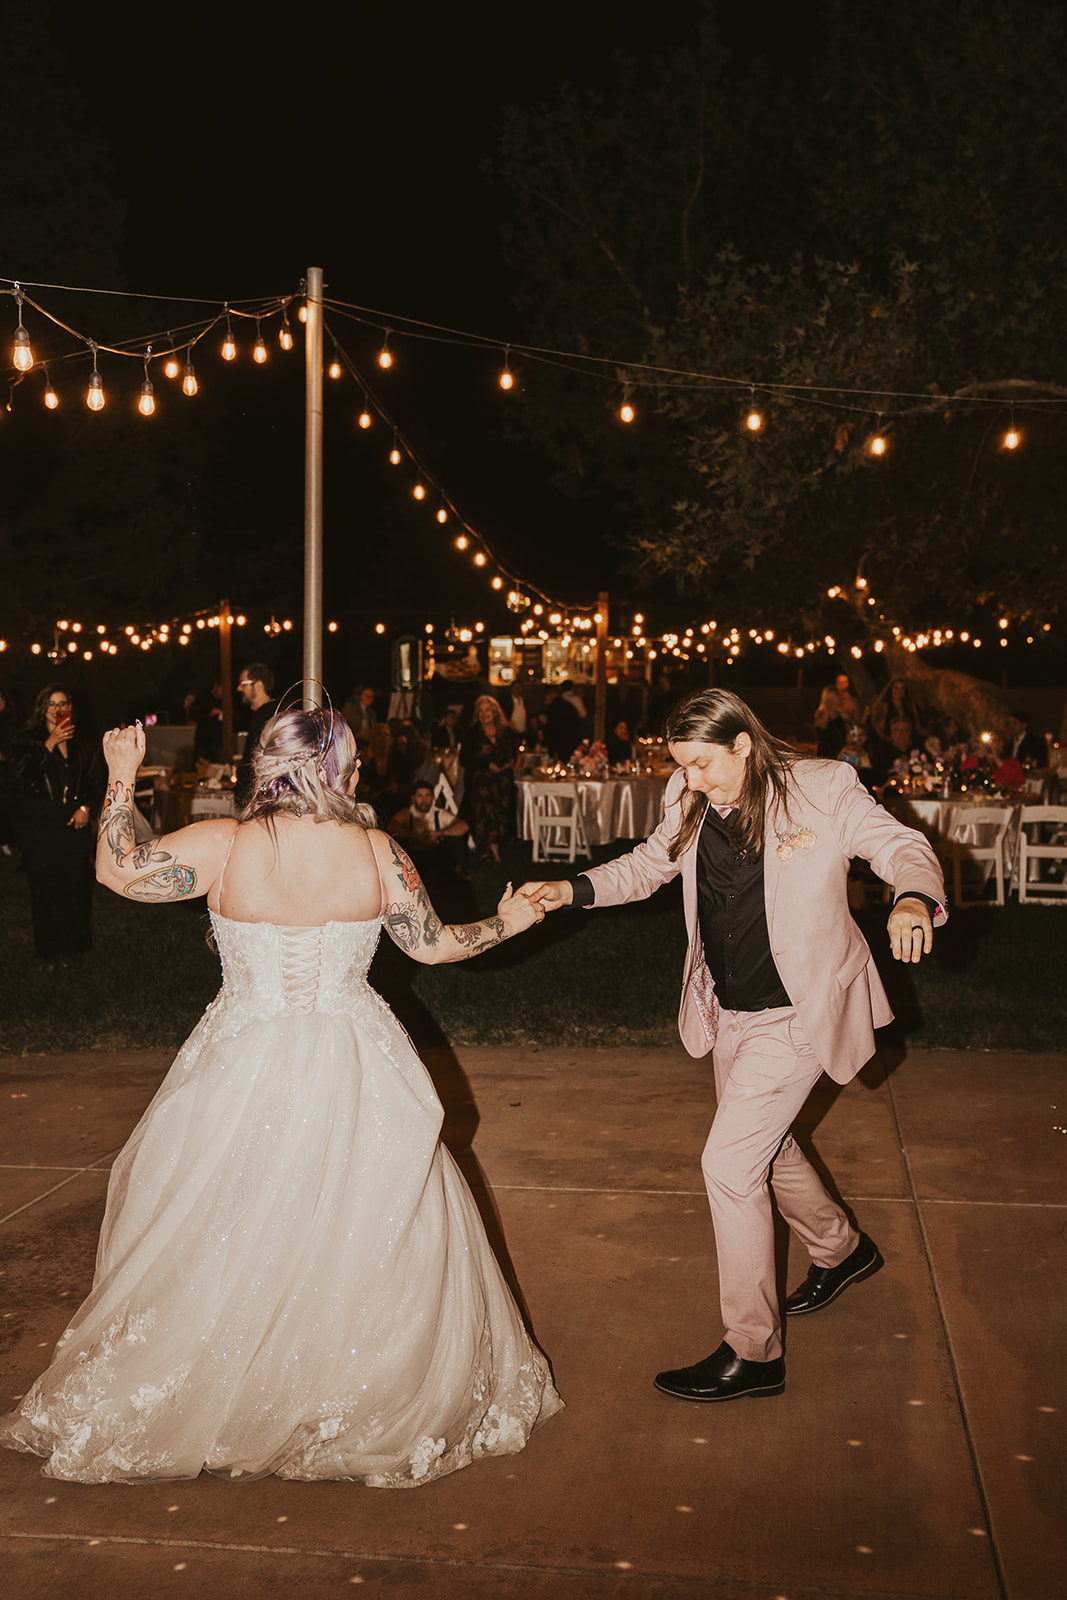 Bride and groom dance under disco ball during wedding reception in Livermore, California wine country